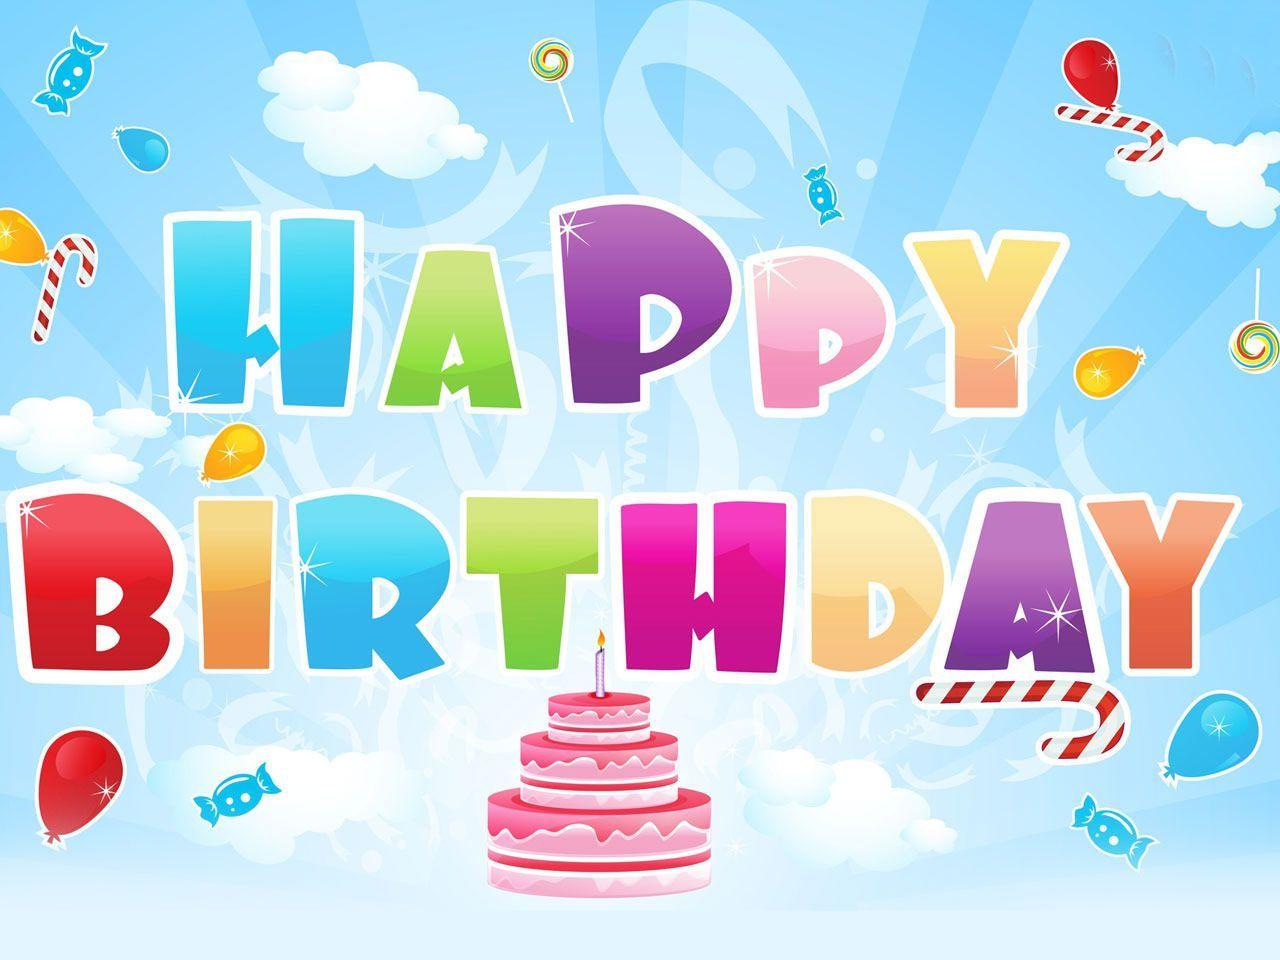 BEST GREETINGS: Best Happy Birthday New Greetings Collections free